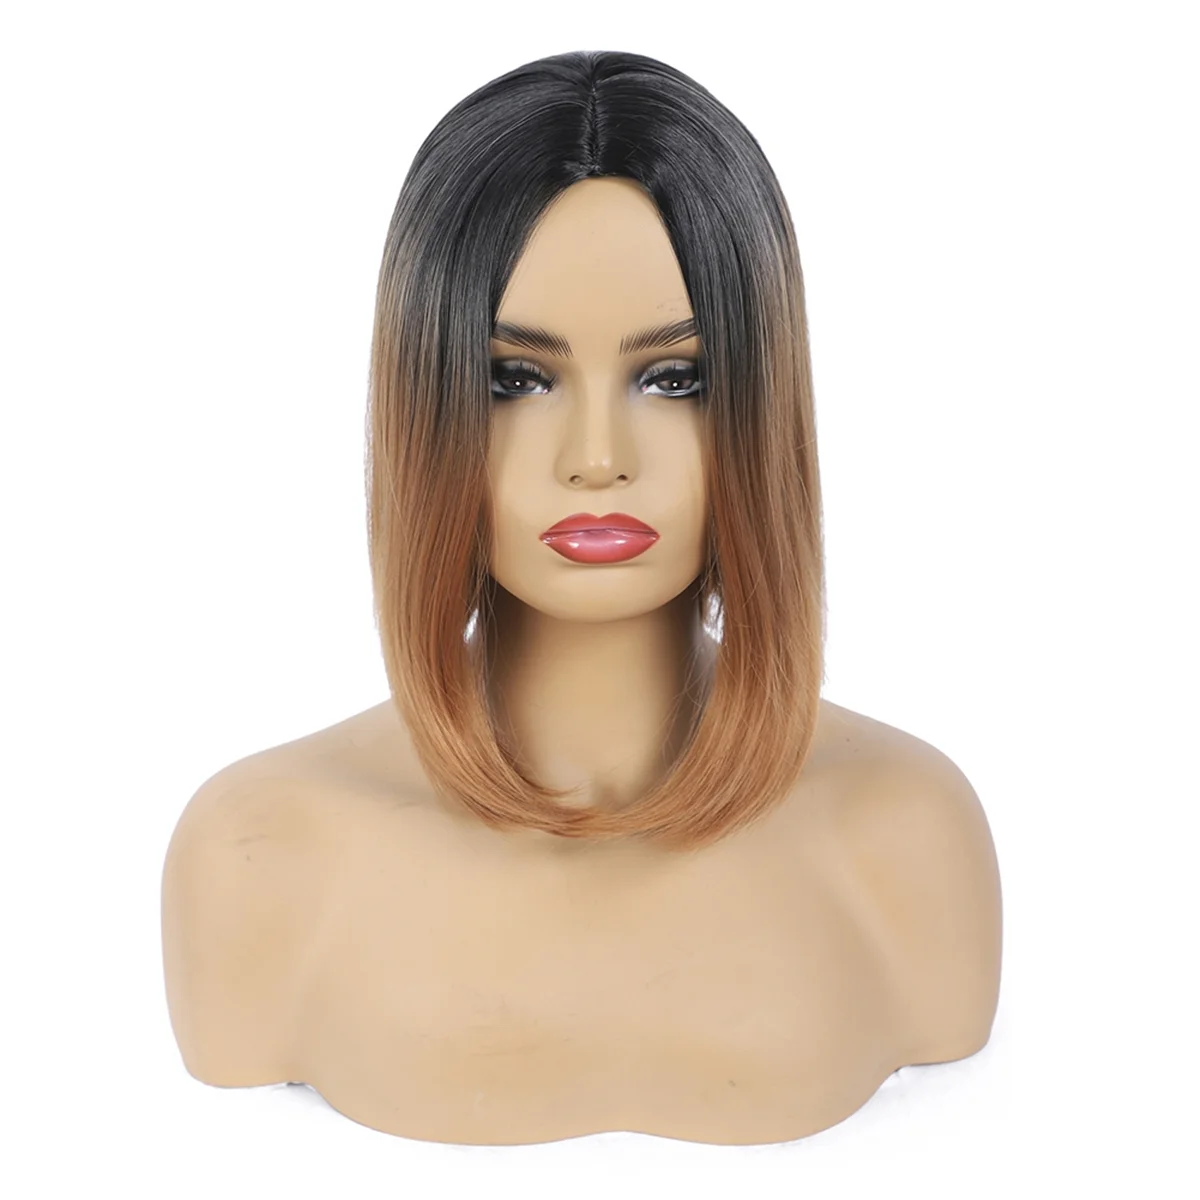 

Fashion Wig Short Hair Middle Parted Color Head Chemical Fiber High Temperature Silk Ladies Wig Head Covering,E